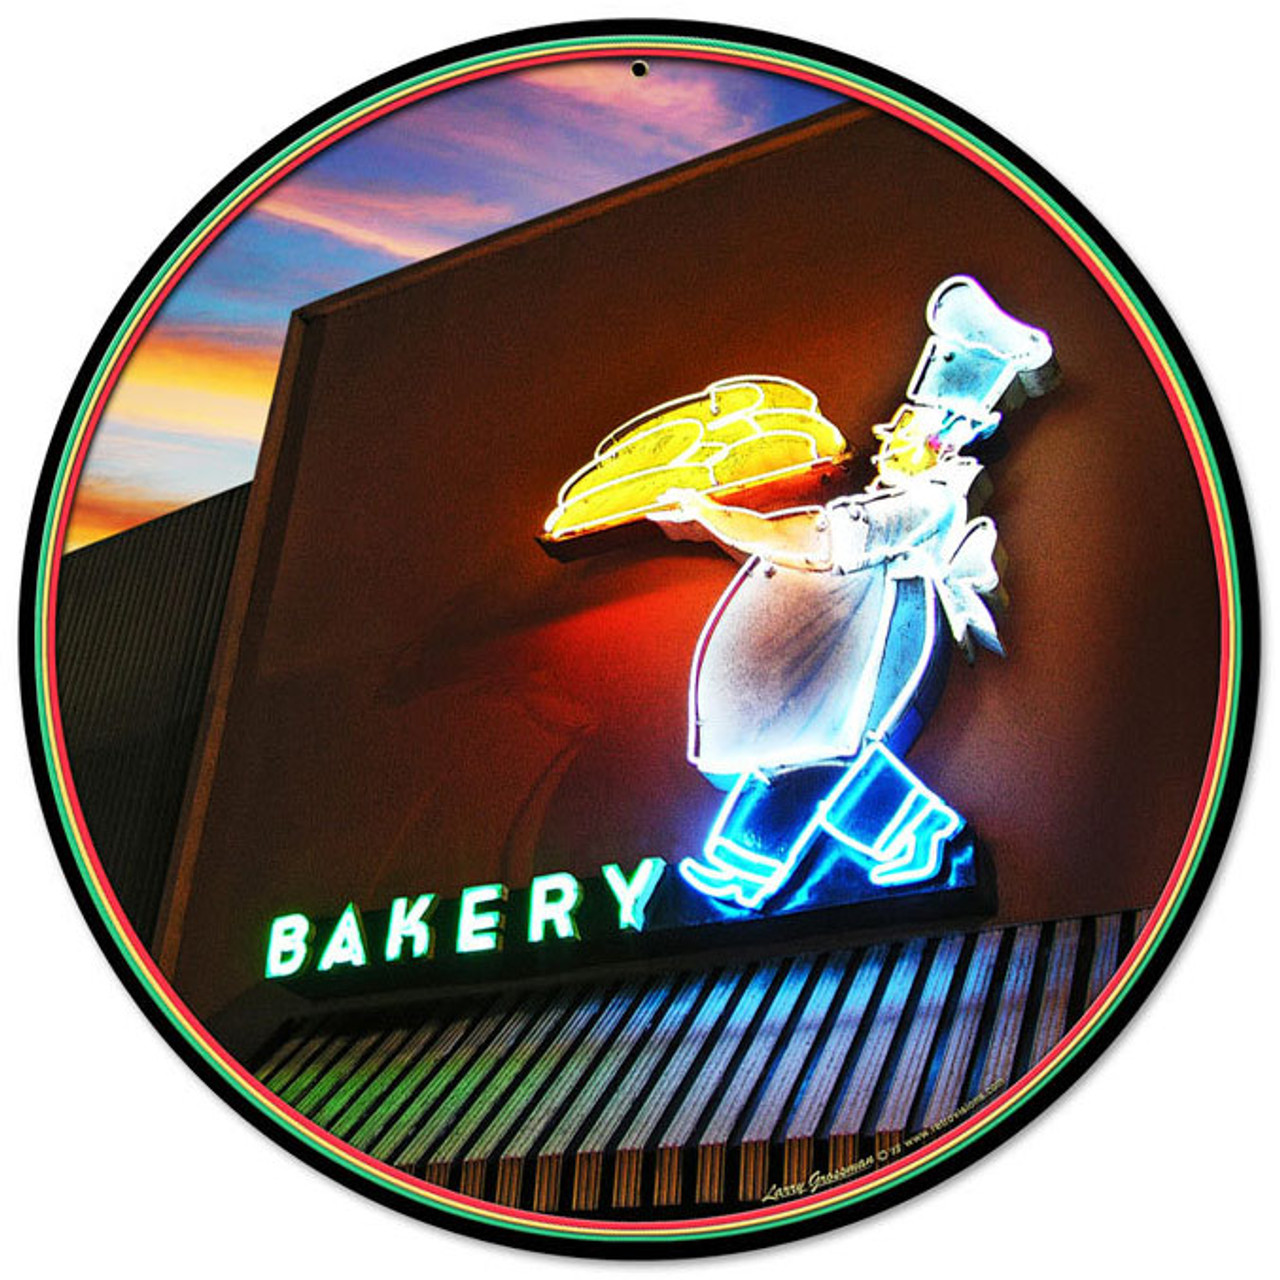 Bakery Round Metal Sign 14 x 14 Inches